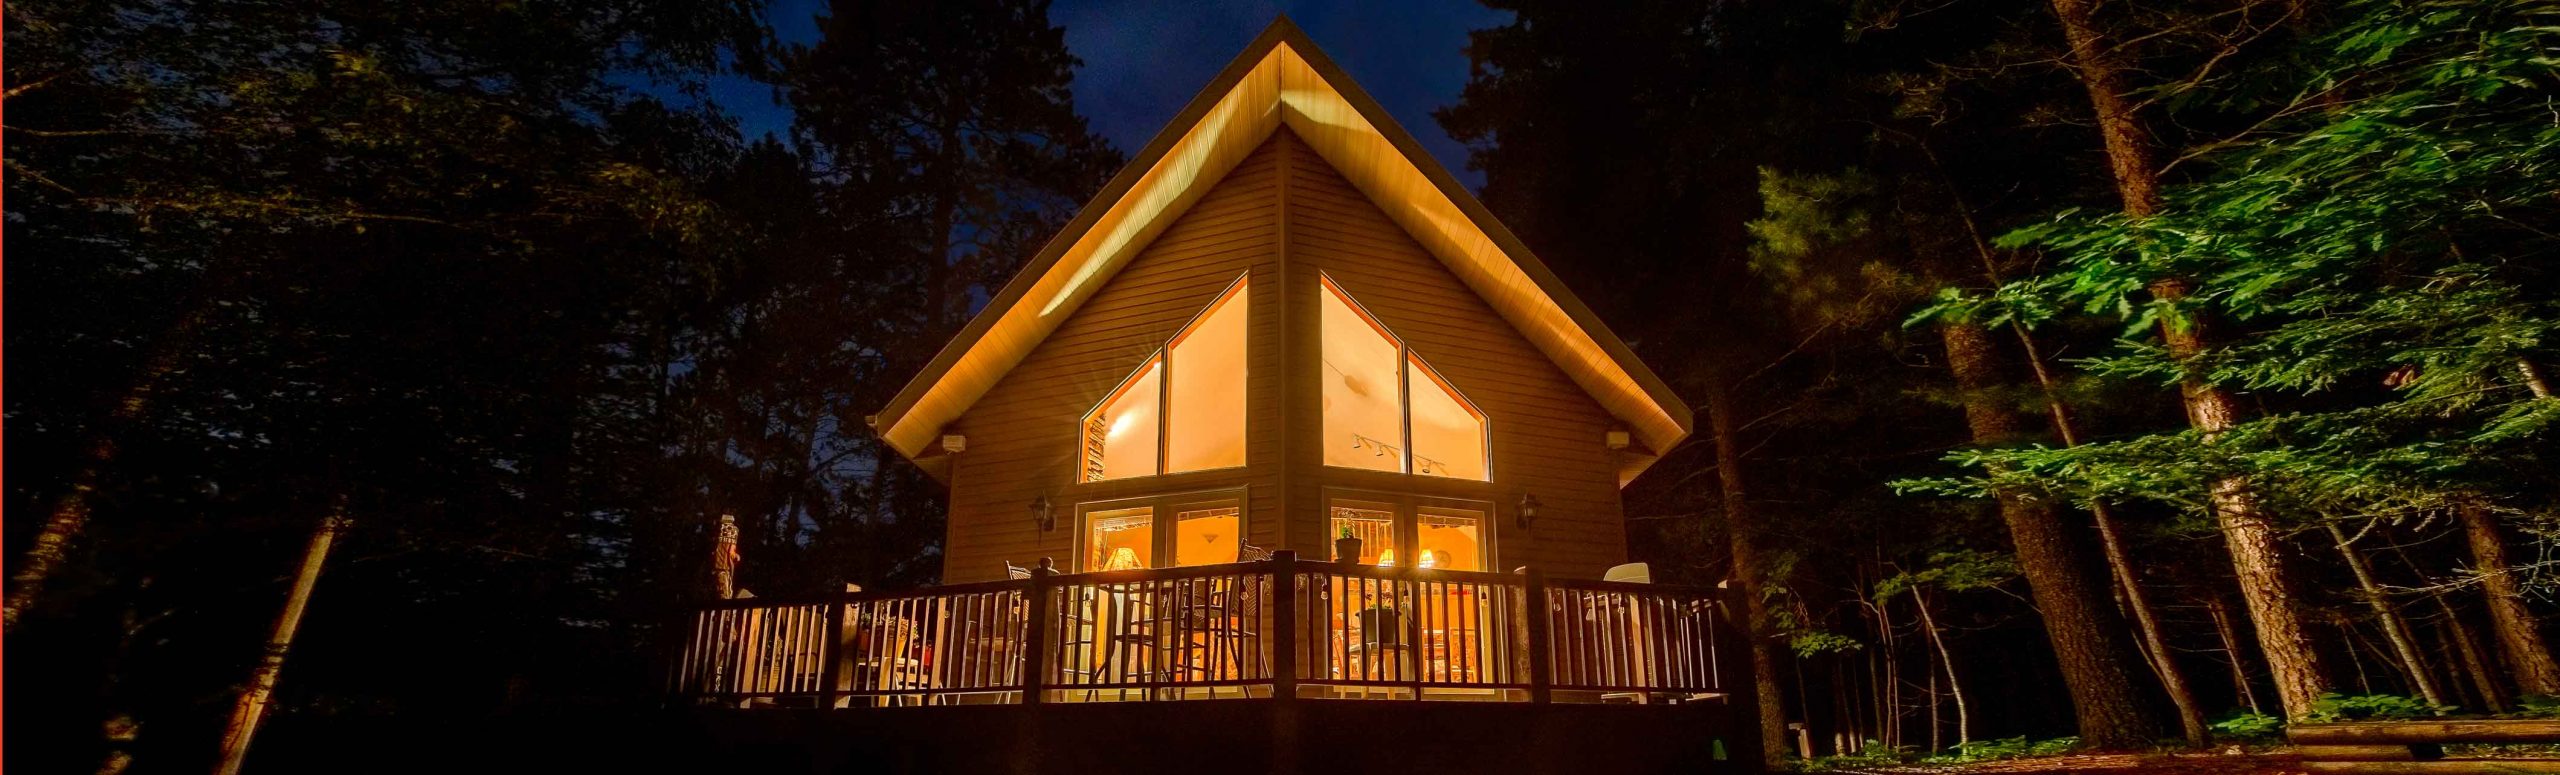 Bright lit up house in the middle of a forest during the night